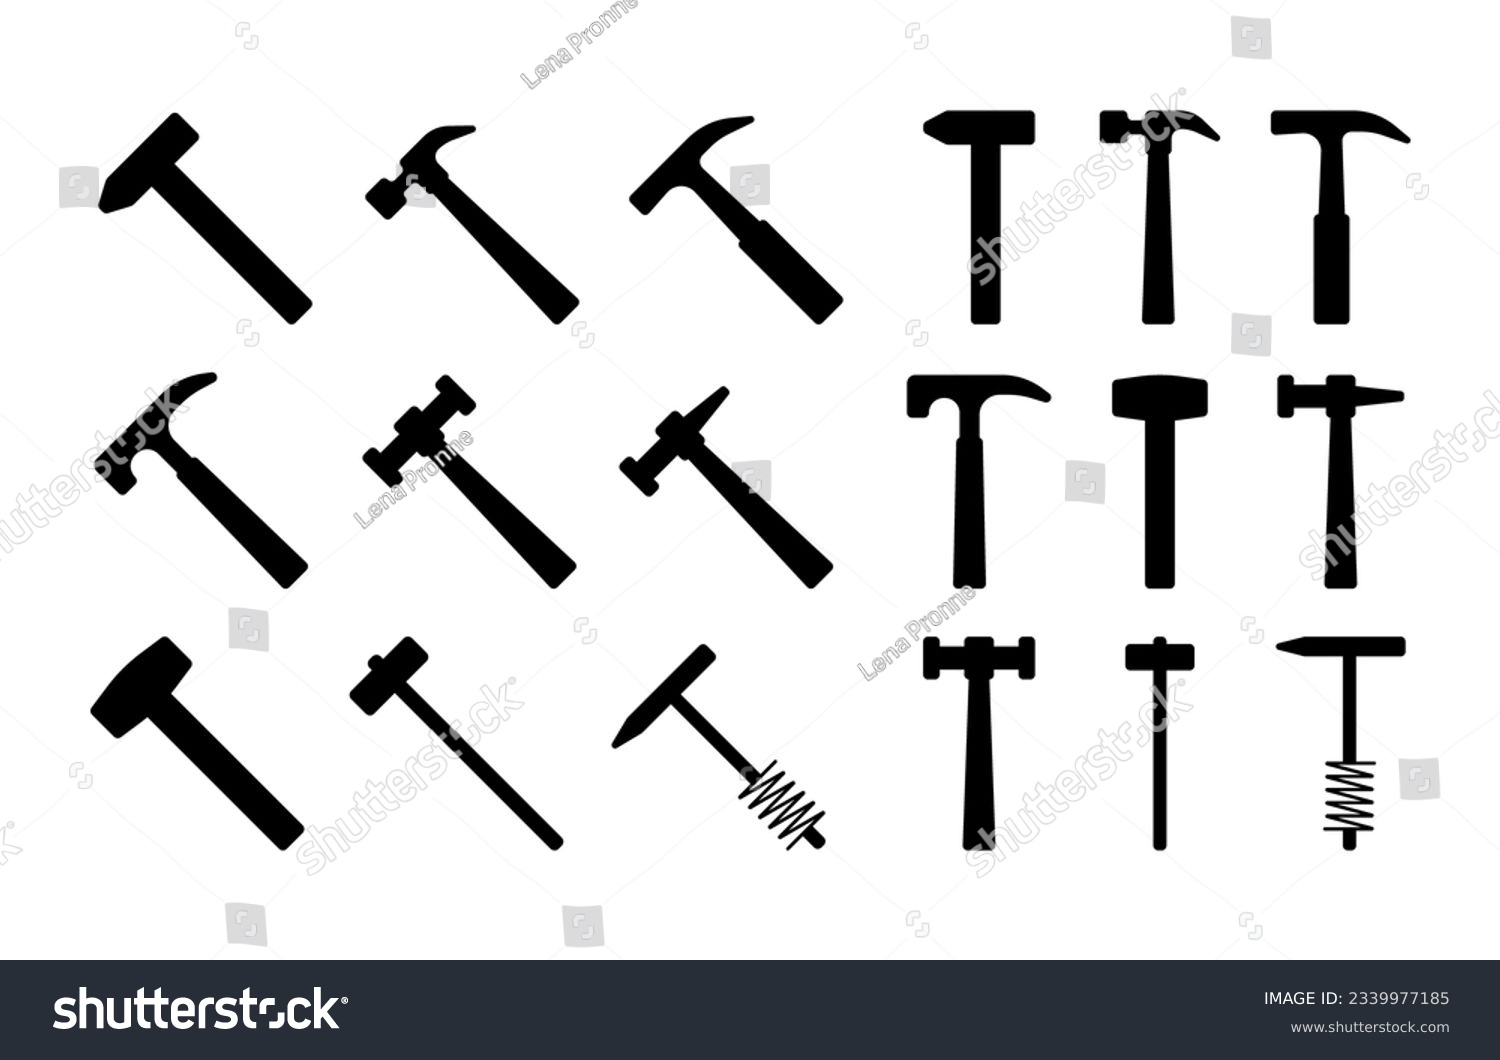 SVG of Hammers silhouette icons cliparts construction tools signs svg